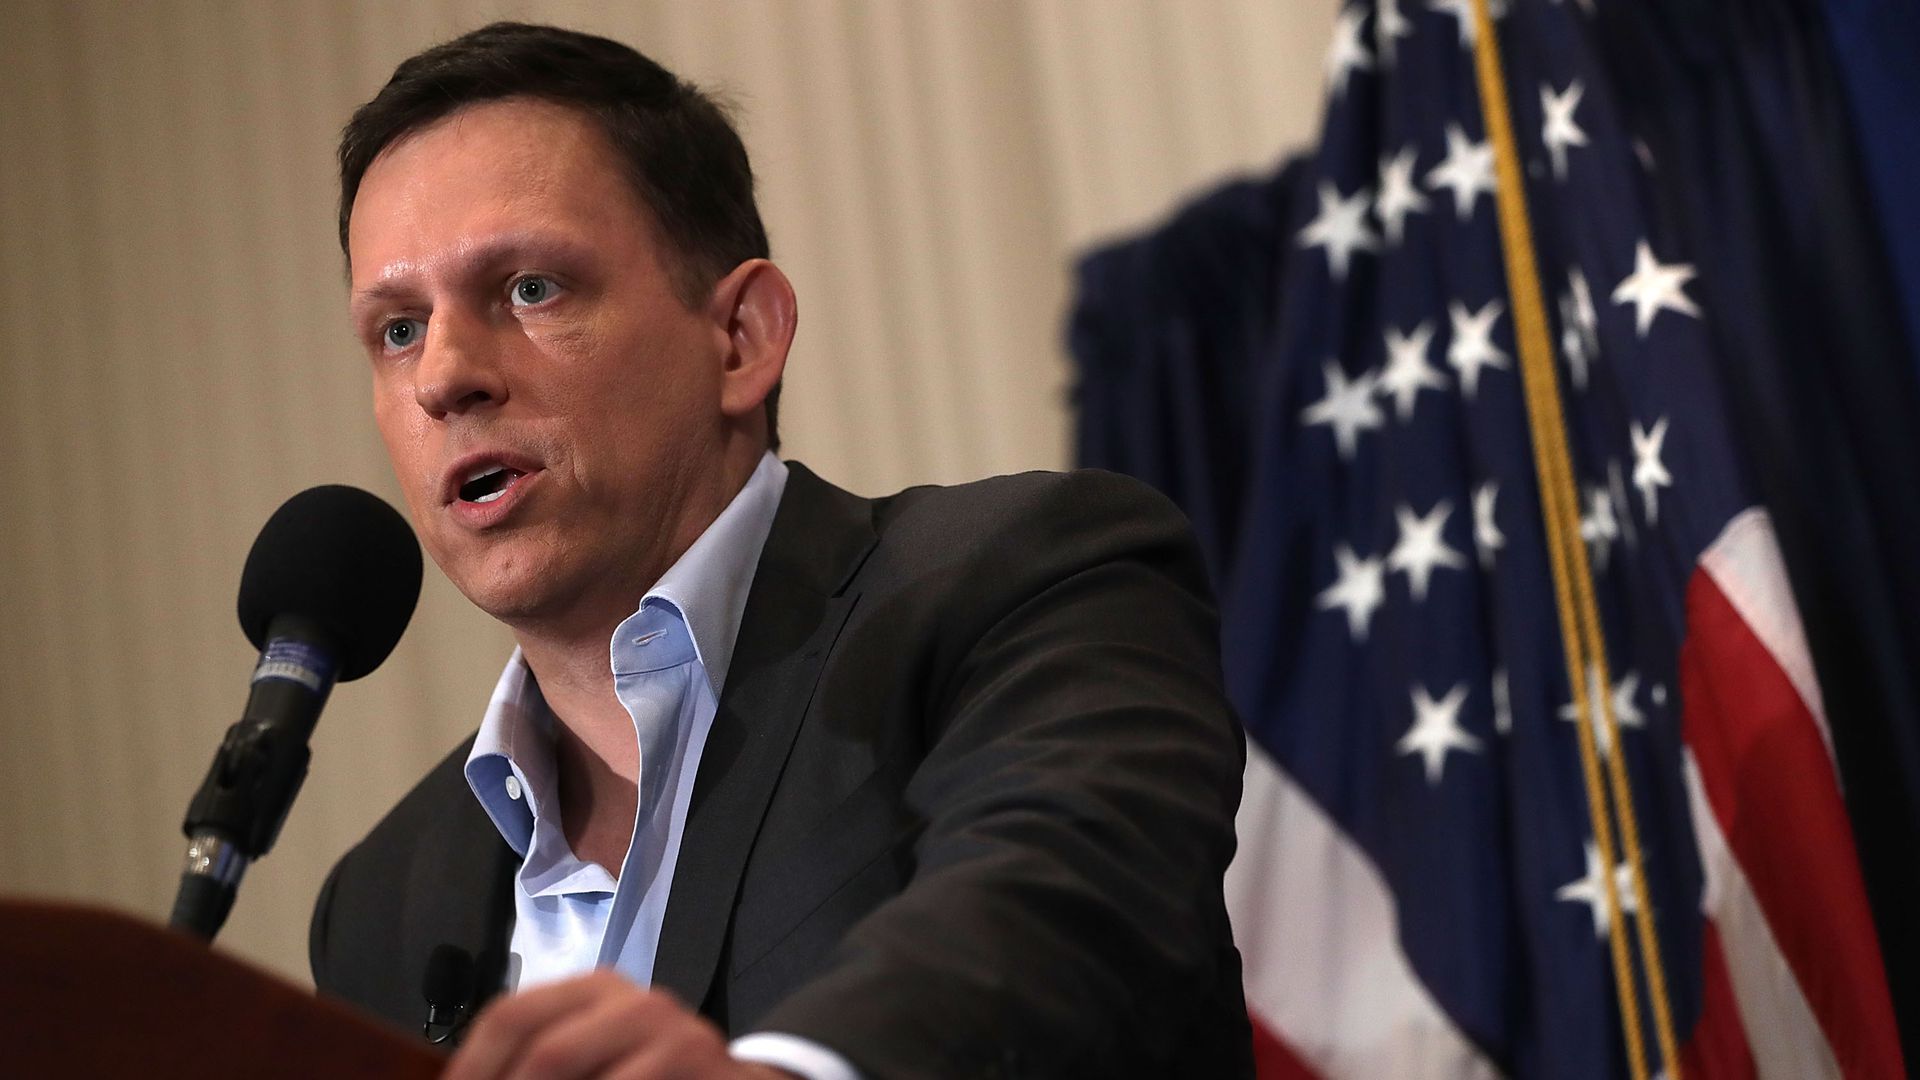 Photo of Peter Thiel at a microphone